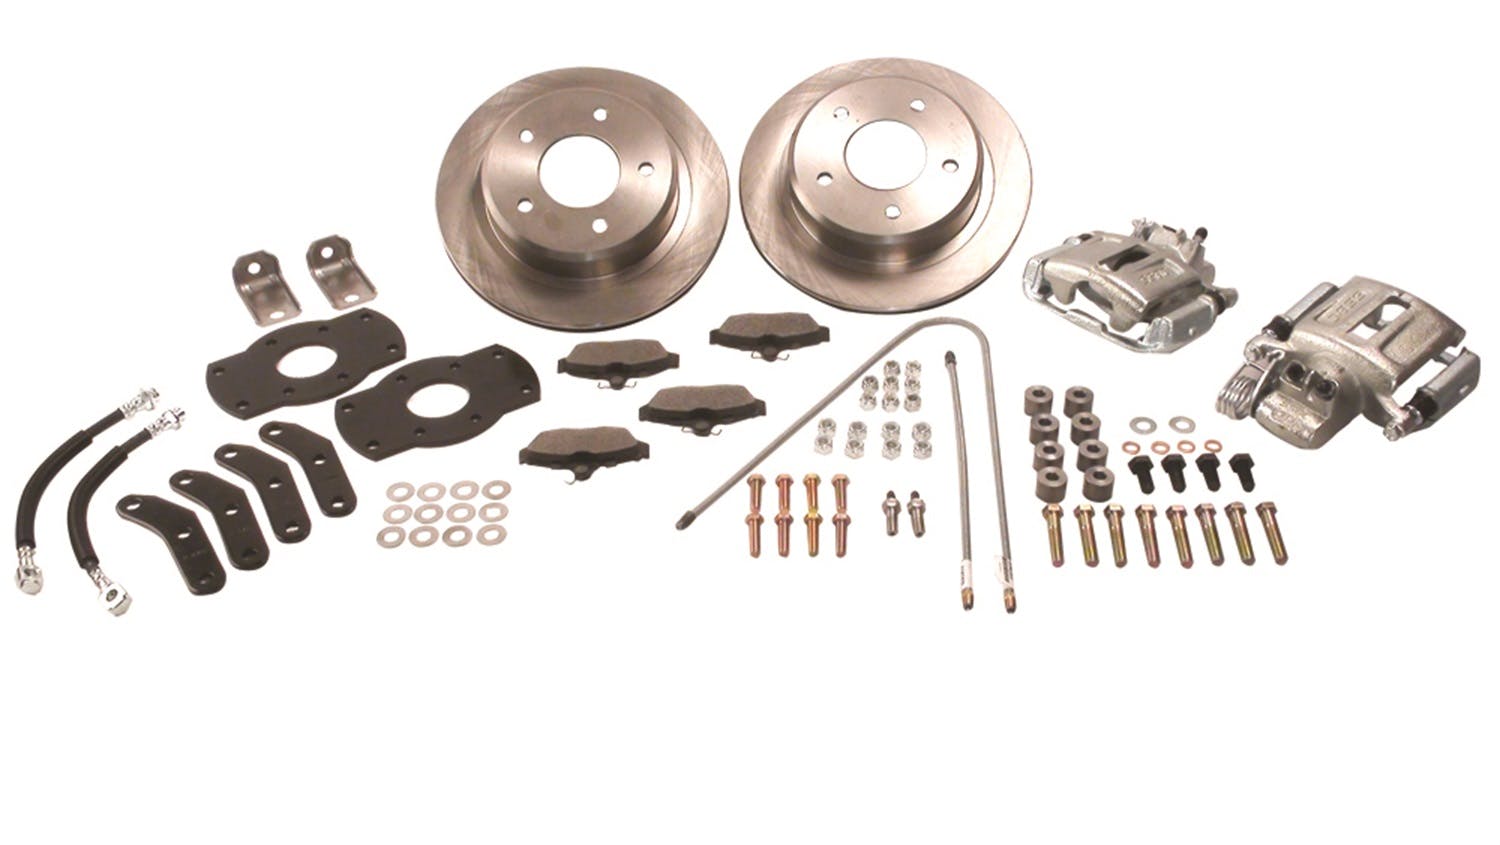 Stainless Steel Brakes A128-7BK Kit A128-7 w/black calipers